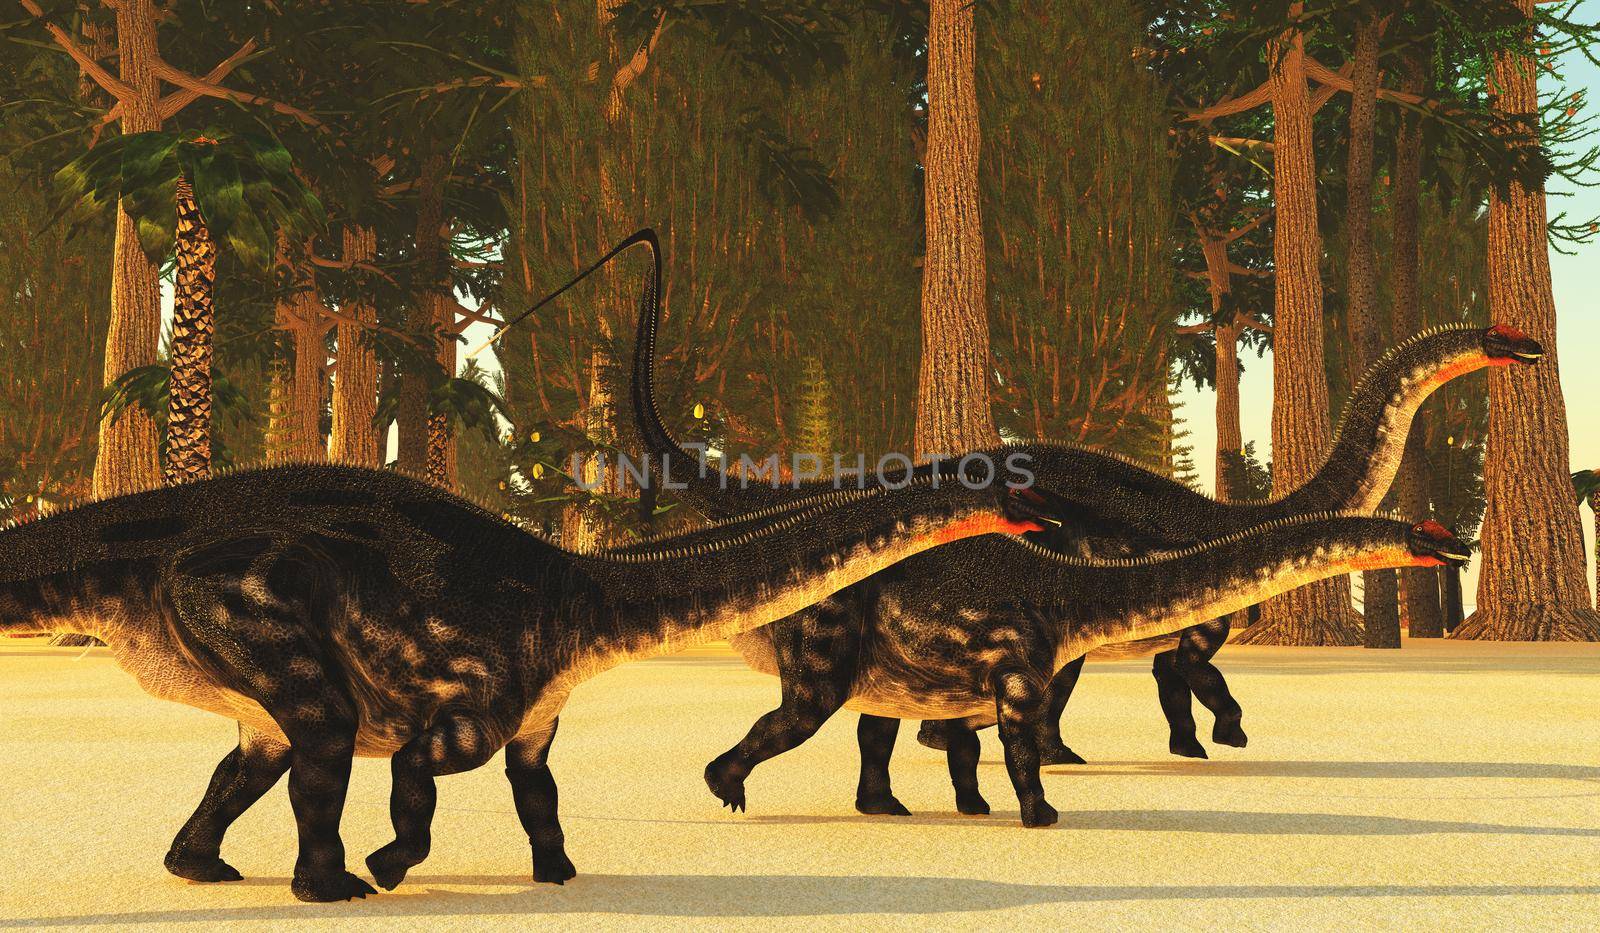 A prehistoric forest during the Jurassic Age of North America dwarfs huge Apatosaurus sauropod dinosaurs.